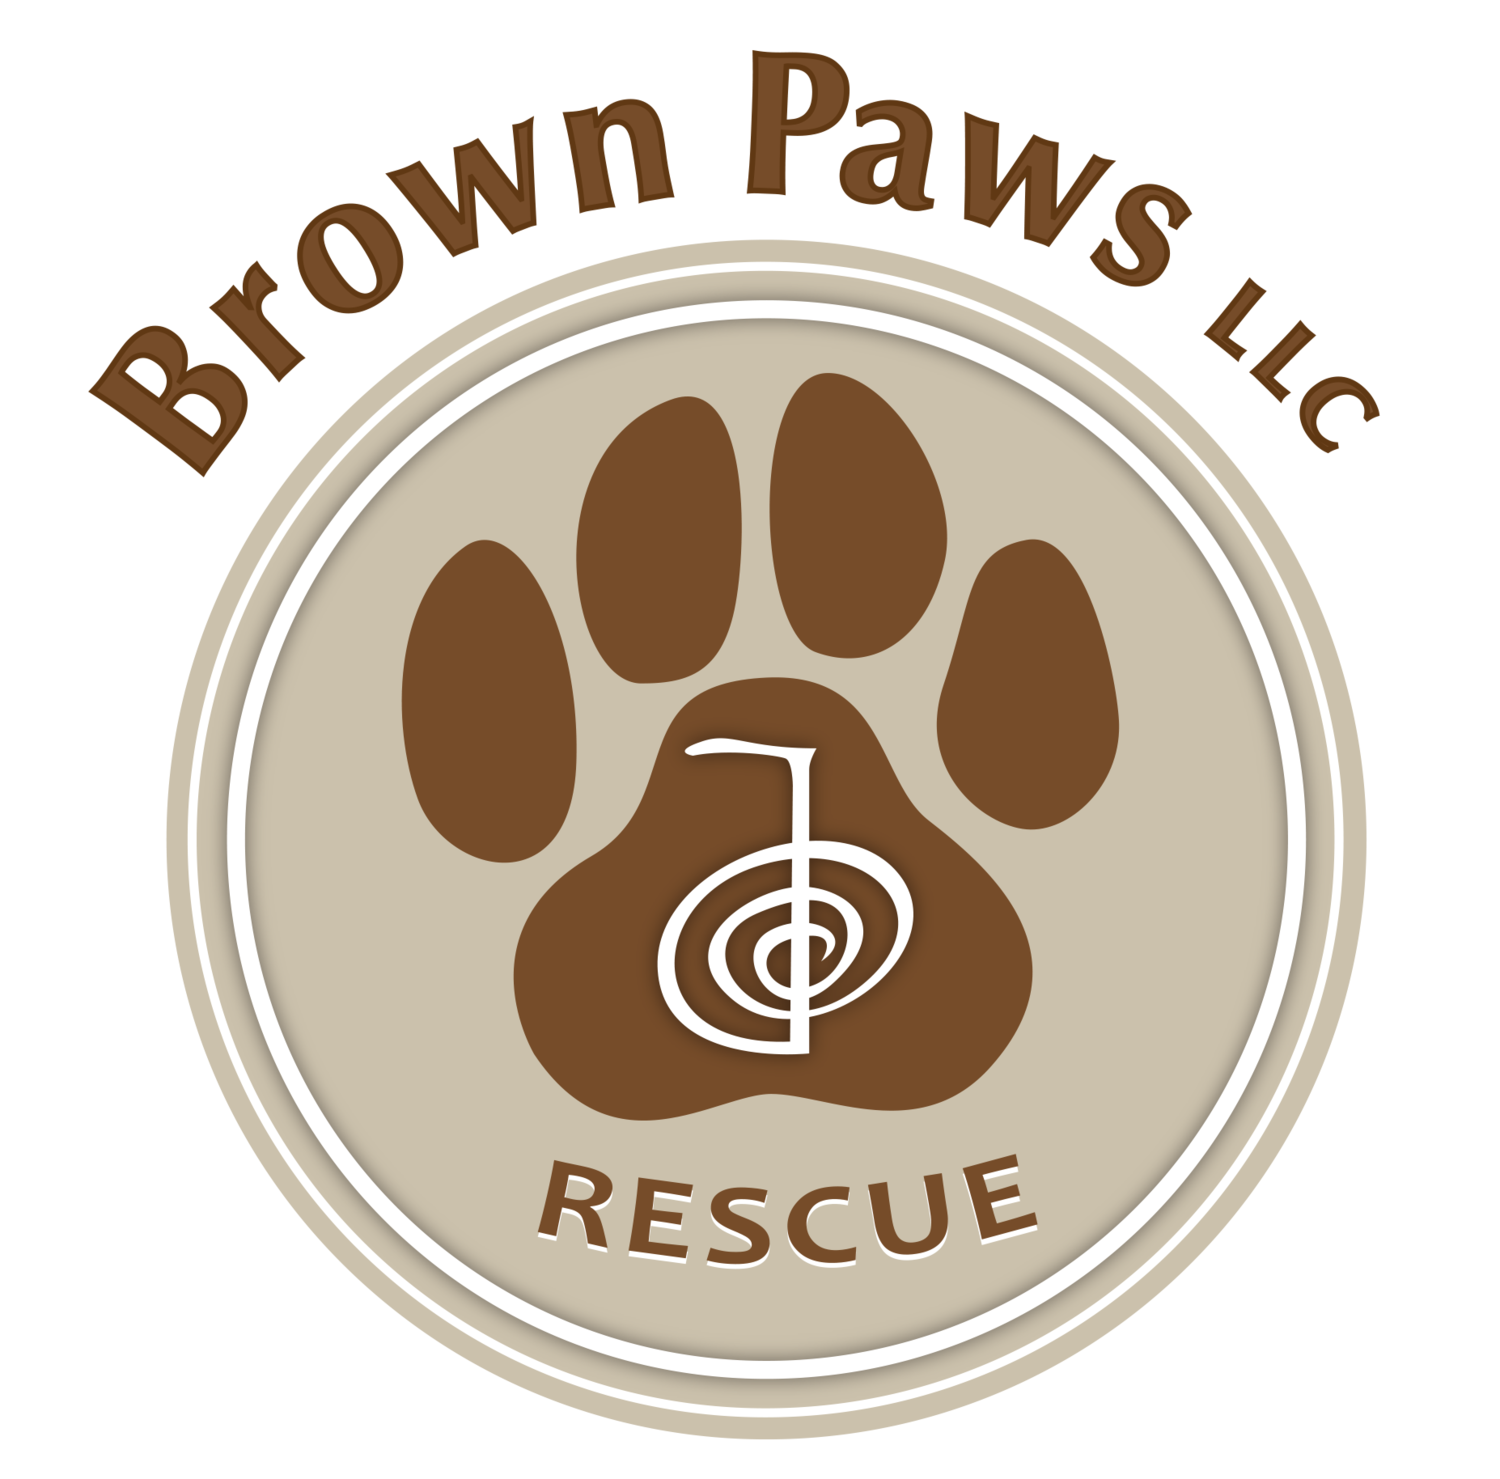 Brown Paws RescuePet Shelter in Middleton WI